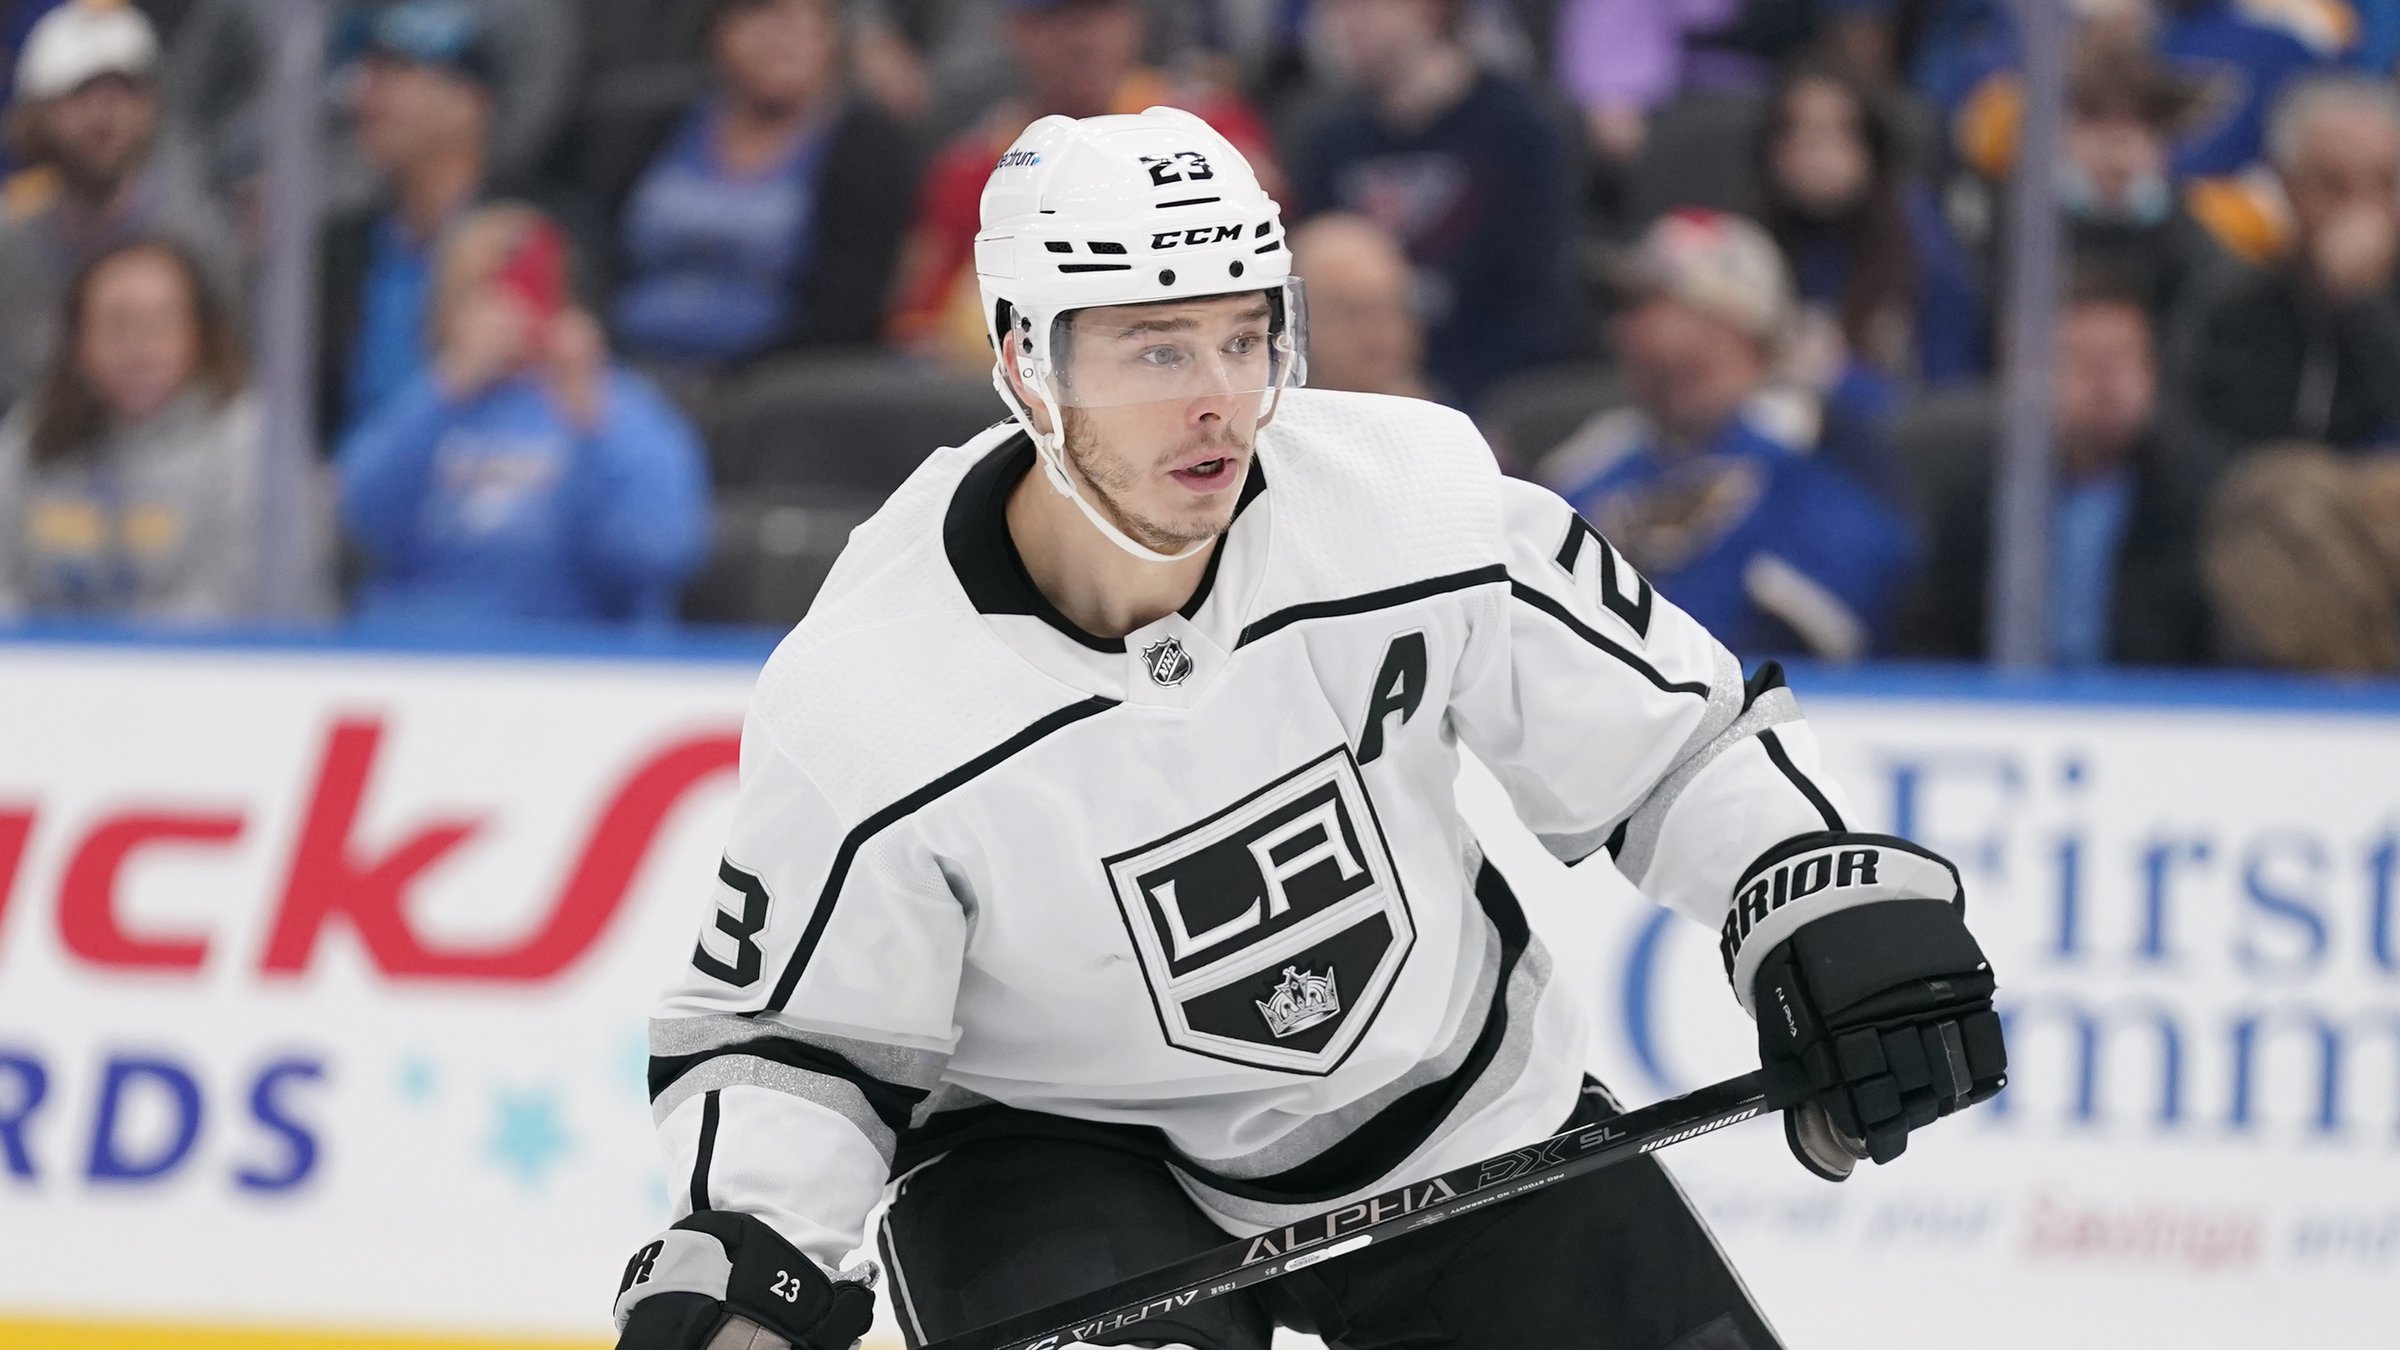 Kings captain Dustin Brown to retire after 2022 playoffs